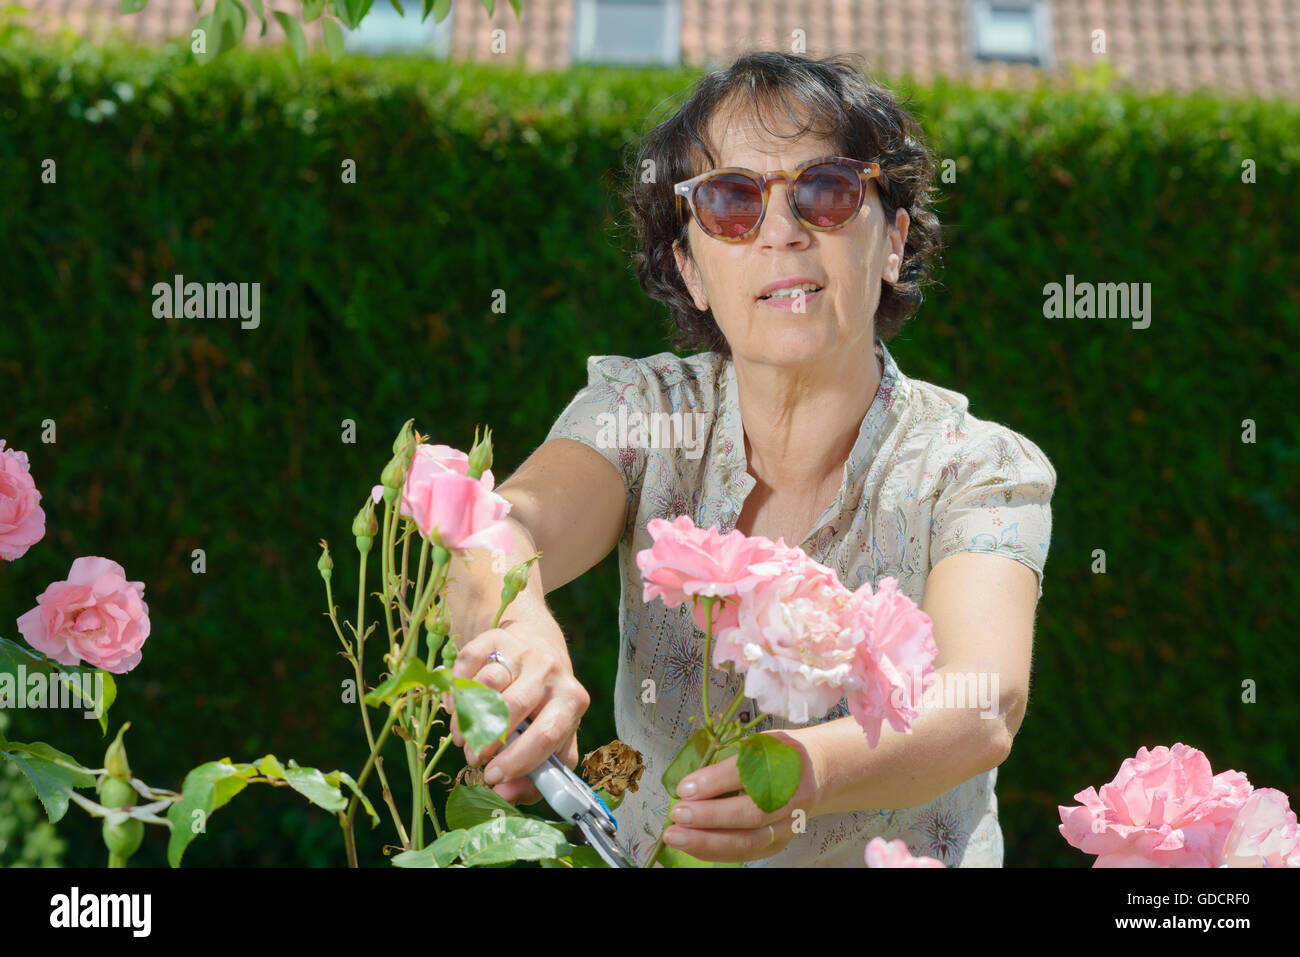 a middle-aged woman with sunglasses in the garden Stock Photo